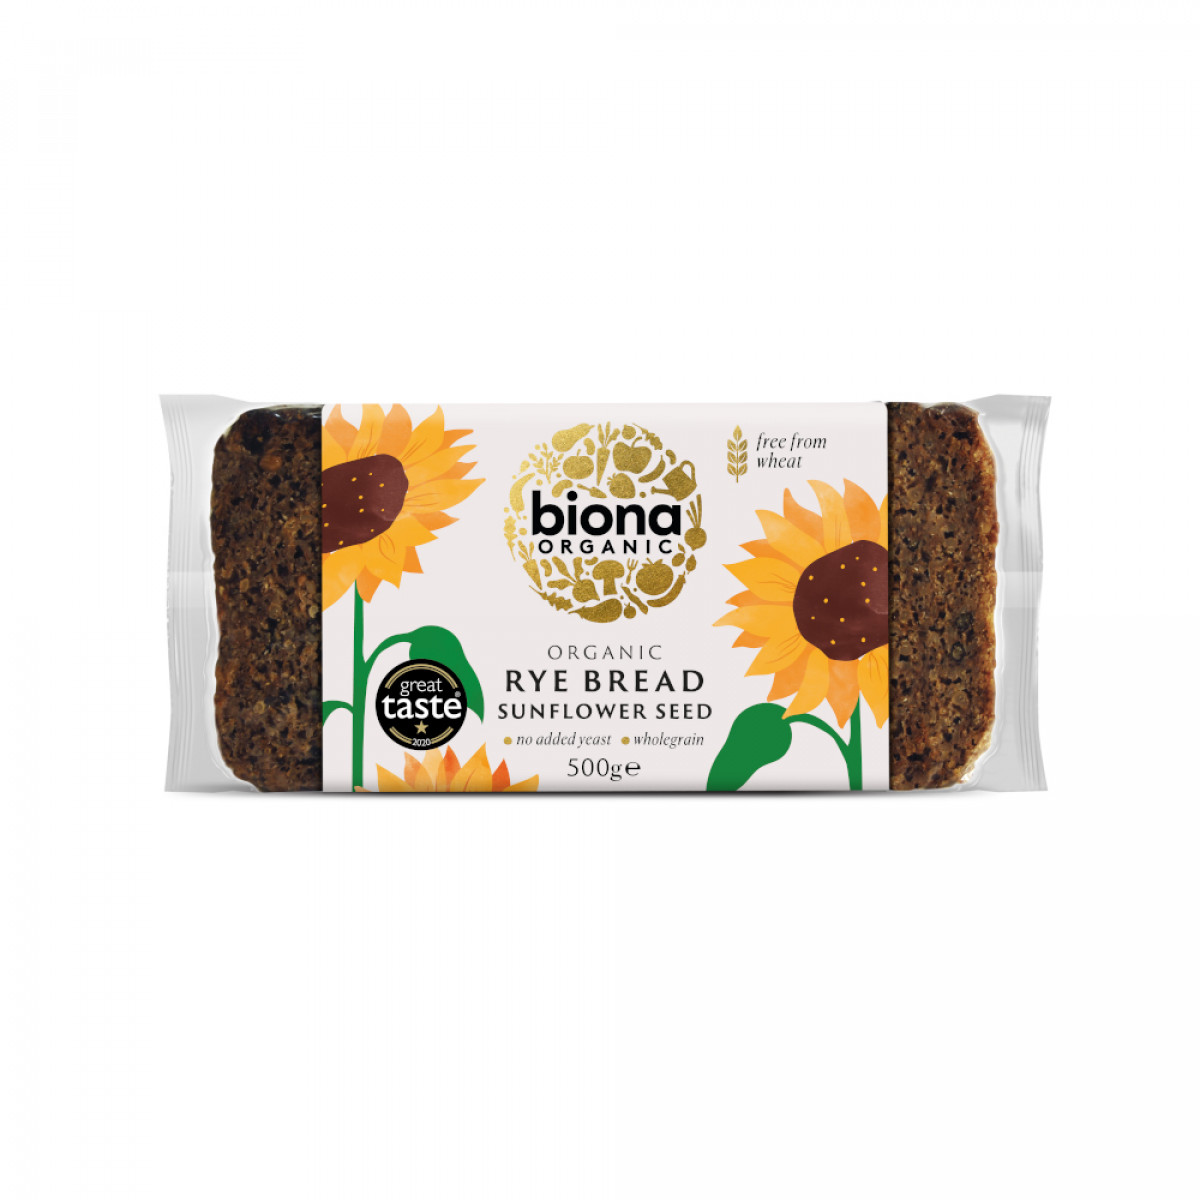 Product picture for Rye Bread with Sunflower Seed